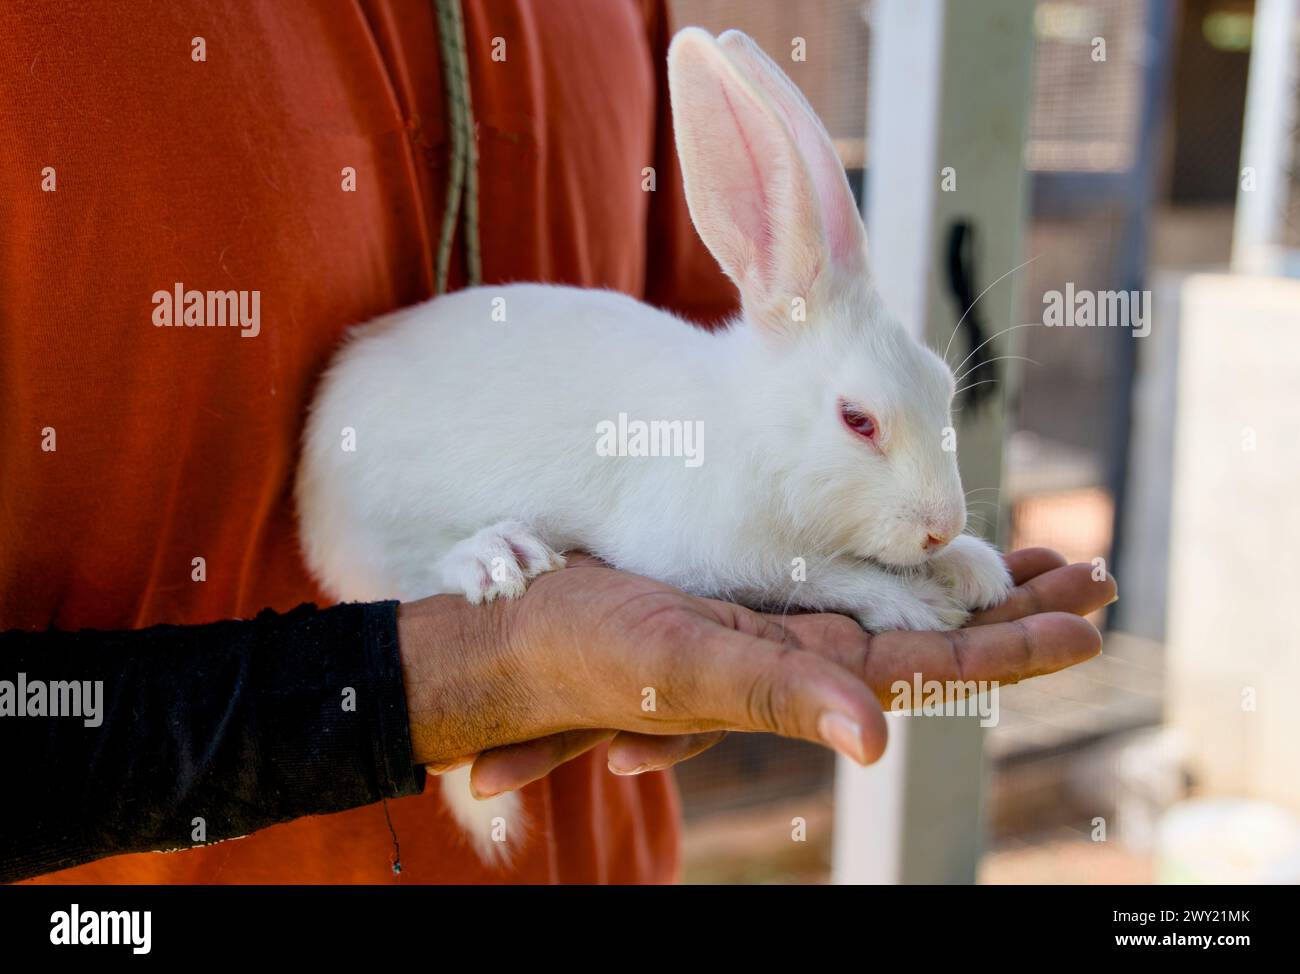 A heartwarming image of a person's hands gently holding a pet rabbit with soft fur. Stock Photo